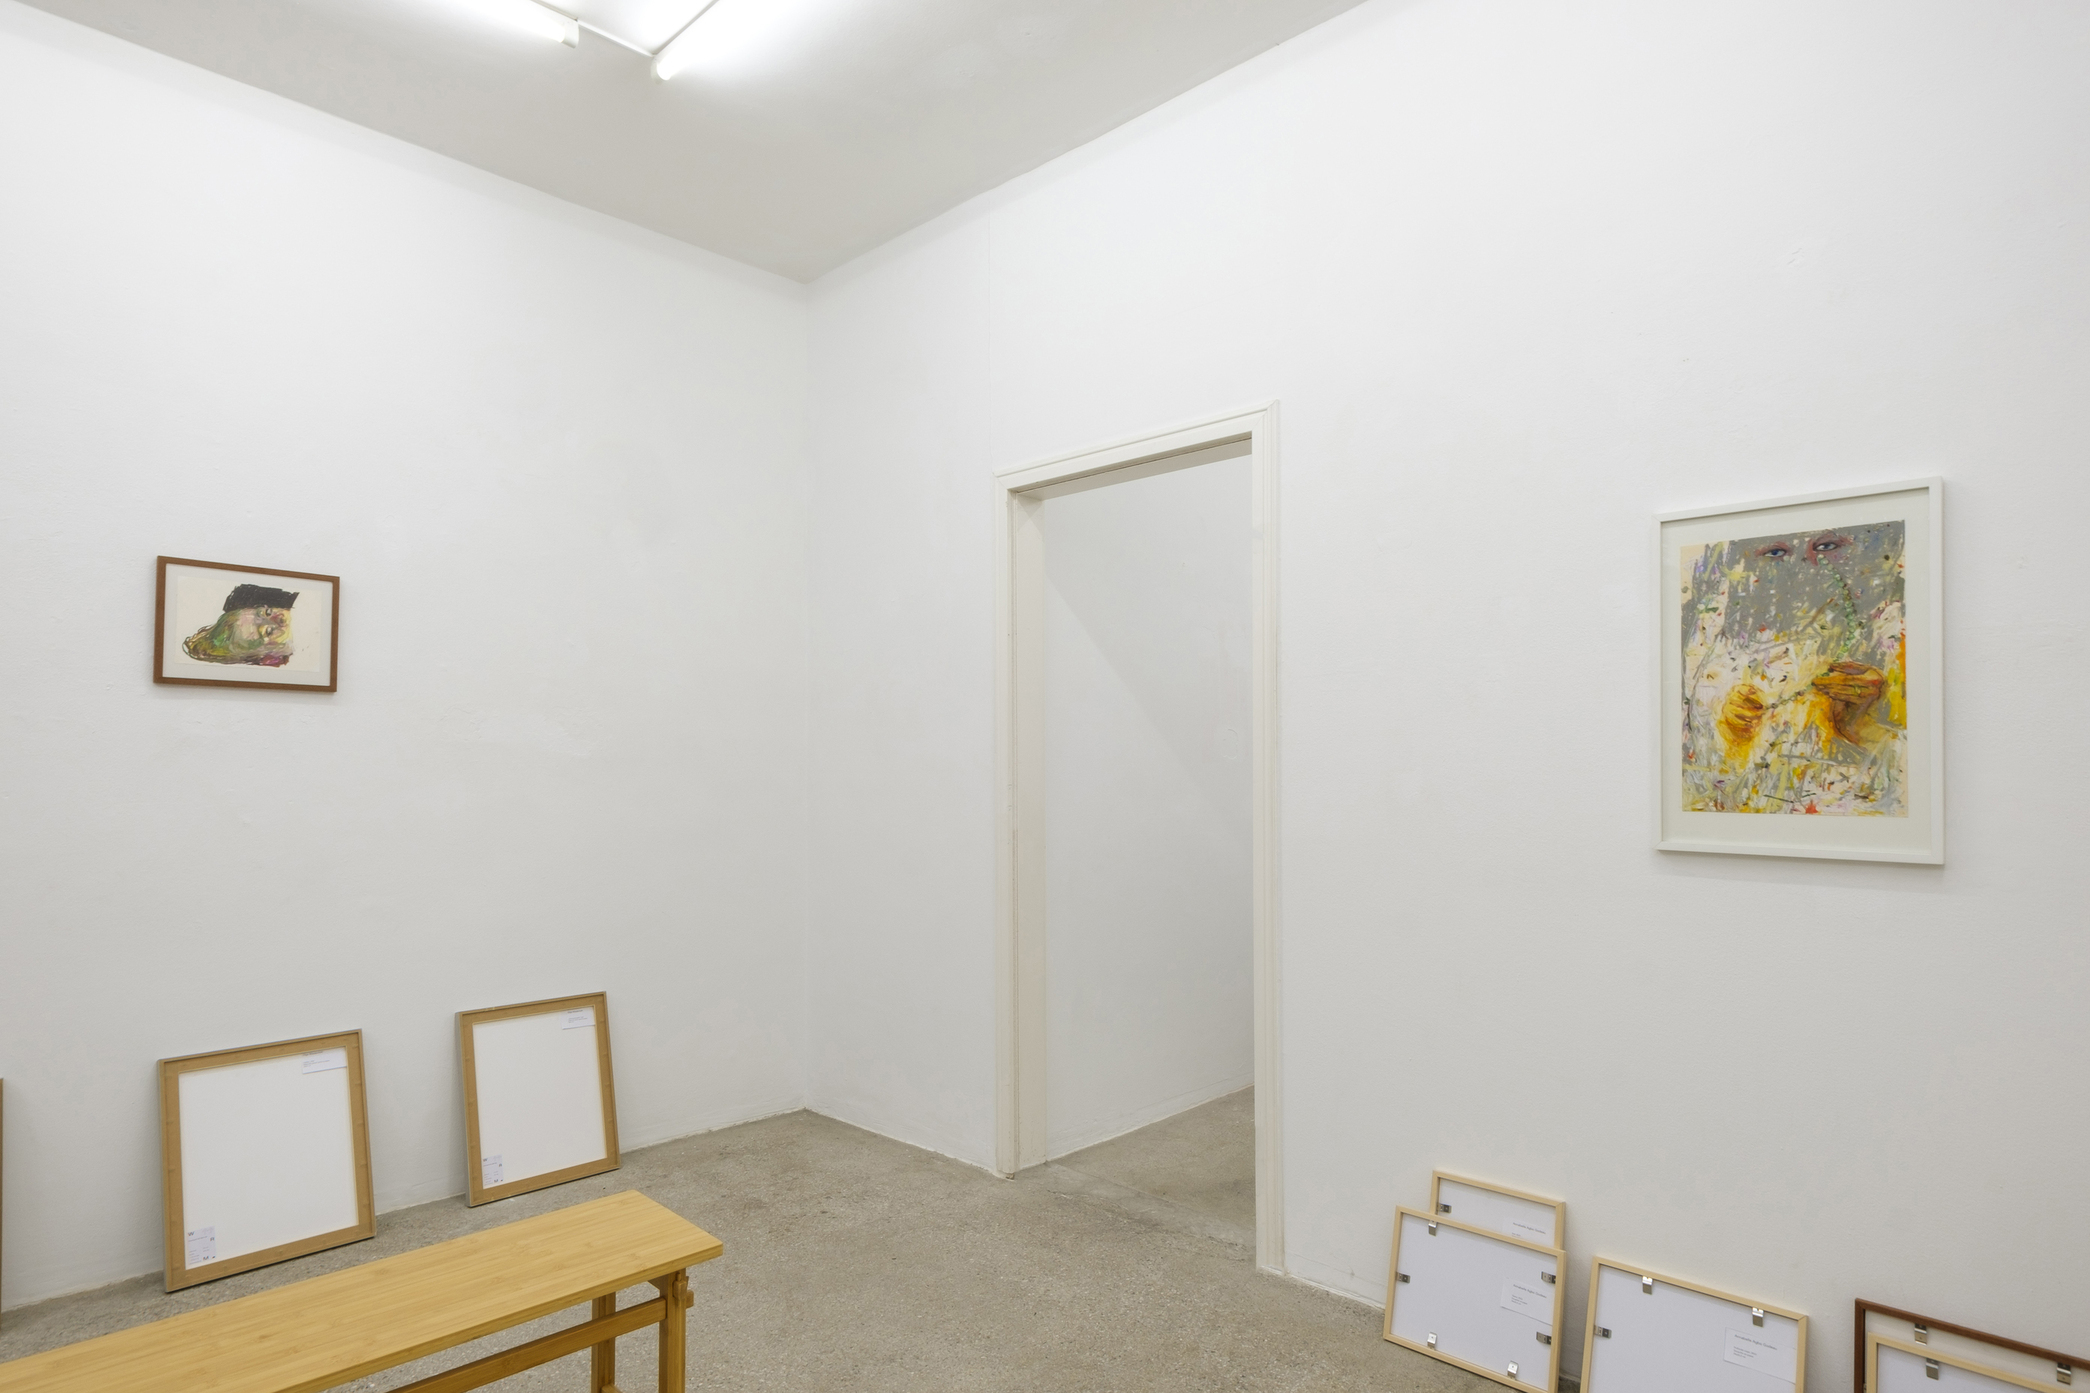 Installation view, "Self Service", with works by Mirela Moscu